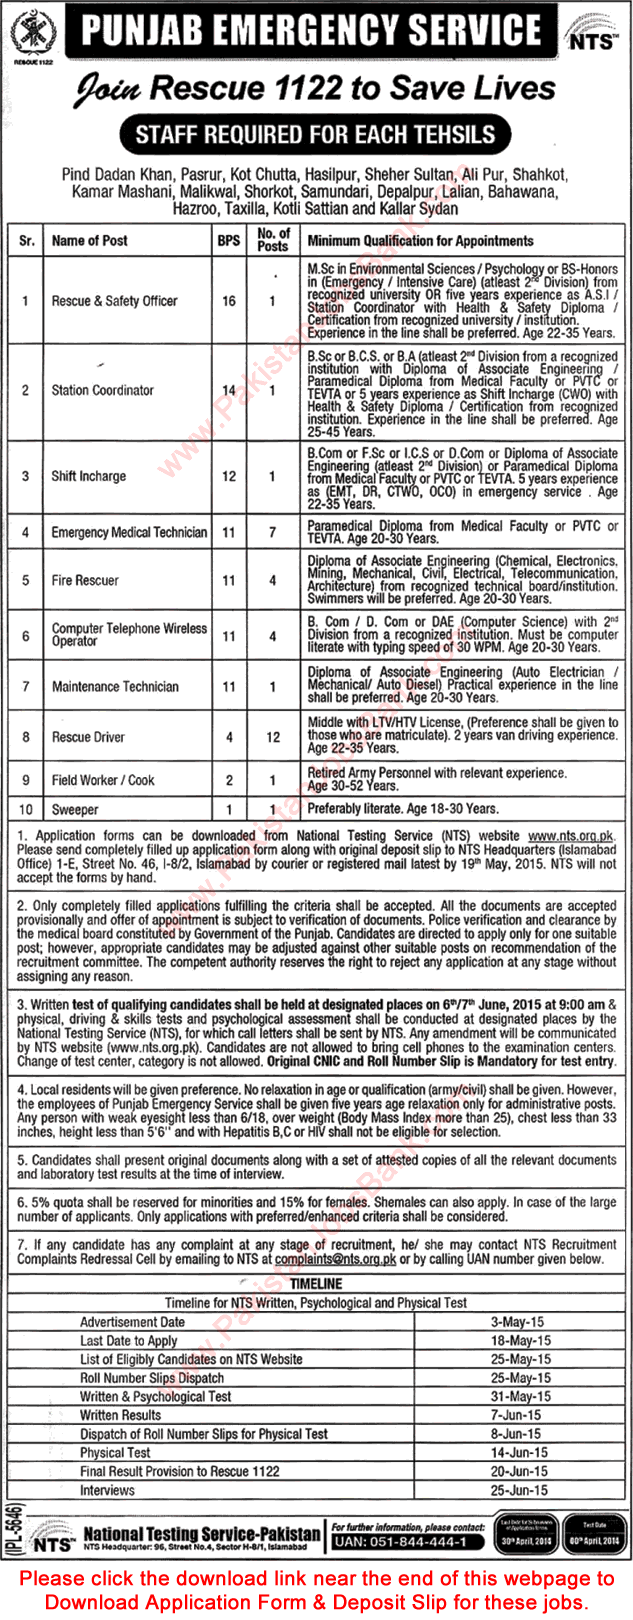 Rescue 1122 Jobs May 2015 Punjab NTS Application Form Download Latest